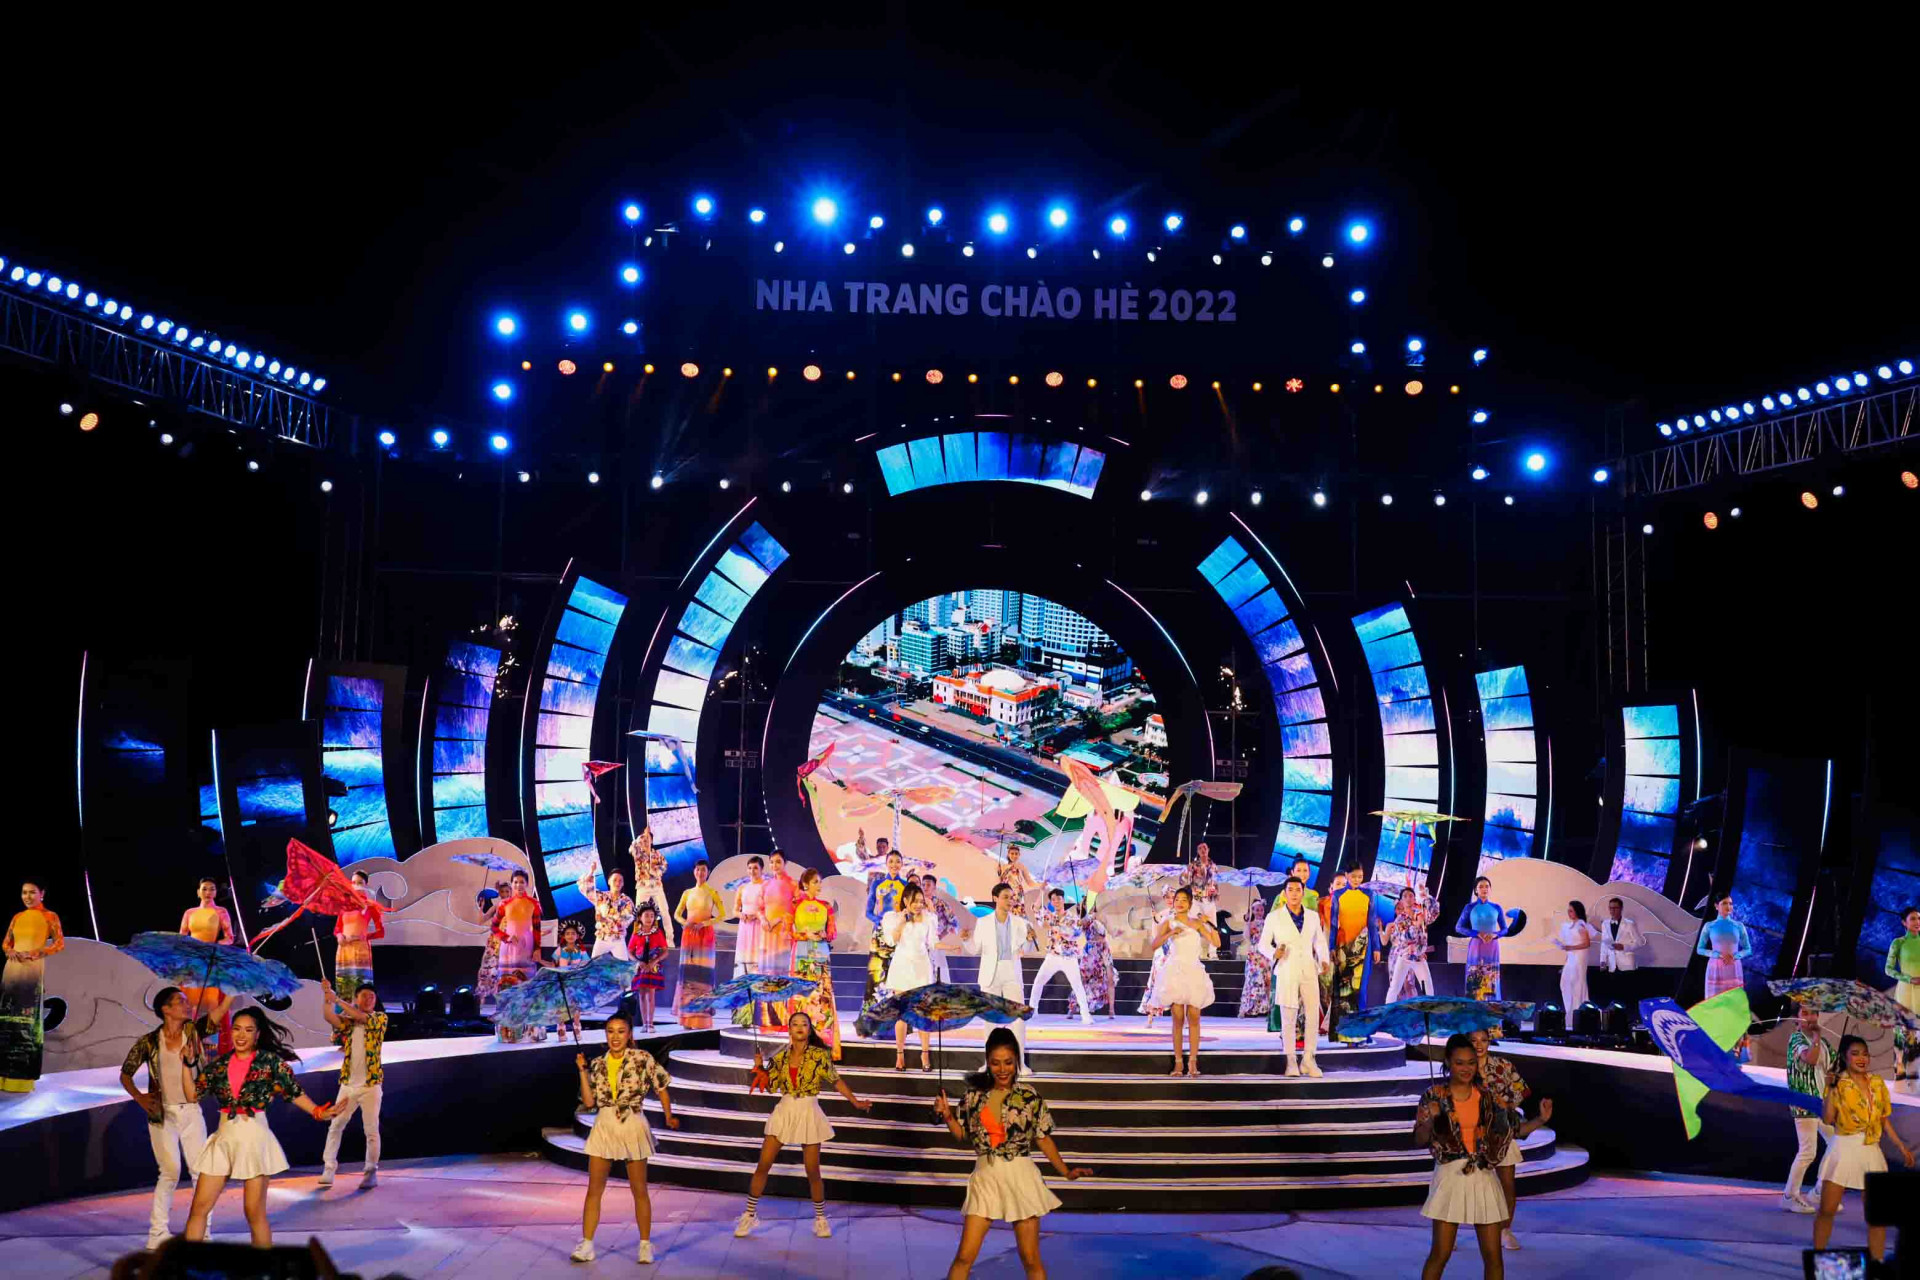 Final performance of “marvelous colorful night” show